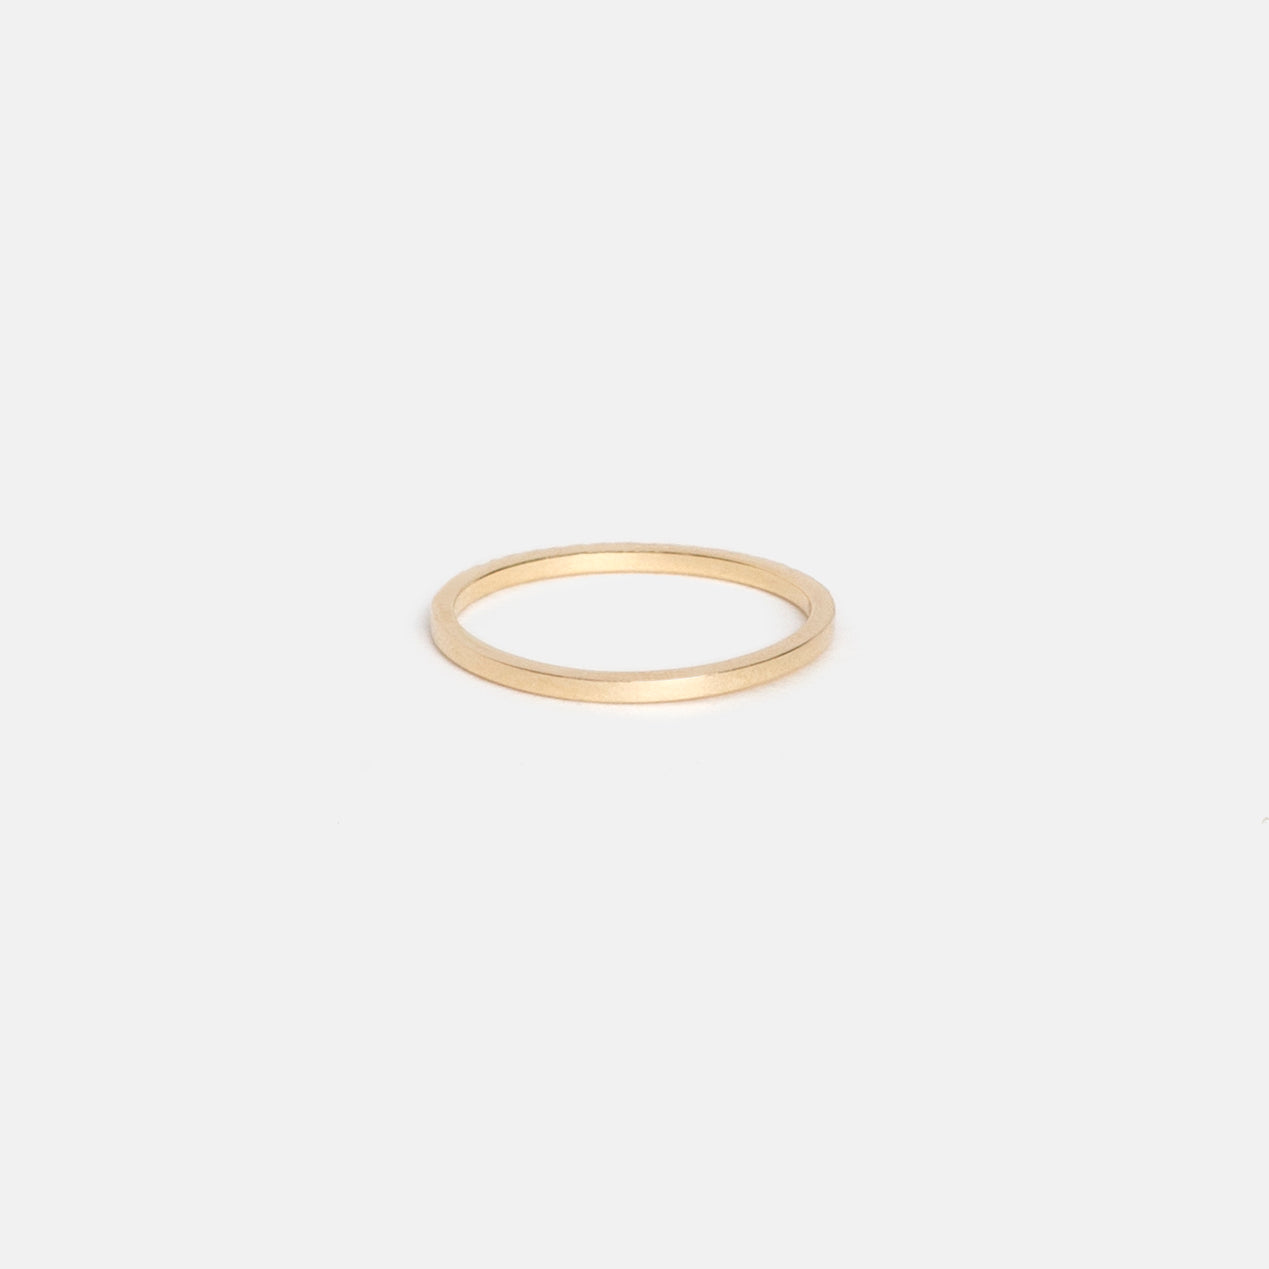 Eile Stacking Ring in 14k Gold set with White Diamonds By SHW Fine Jewelry NYC